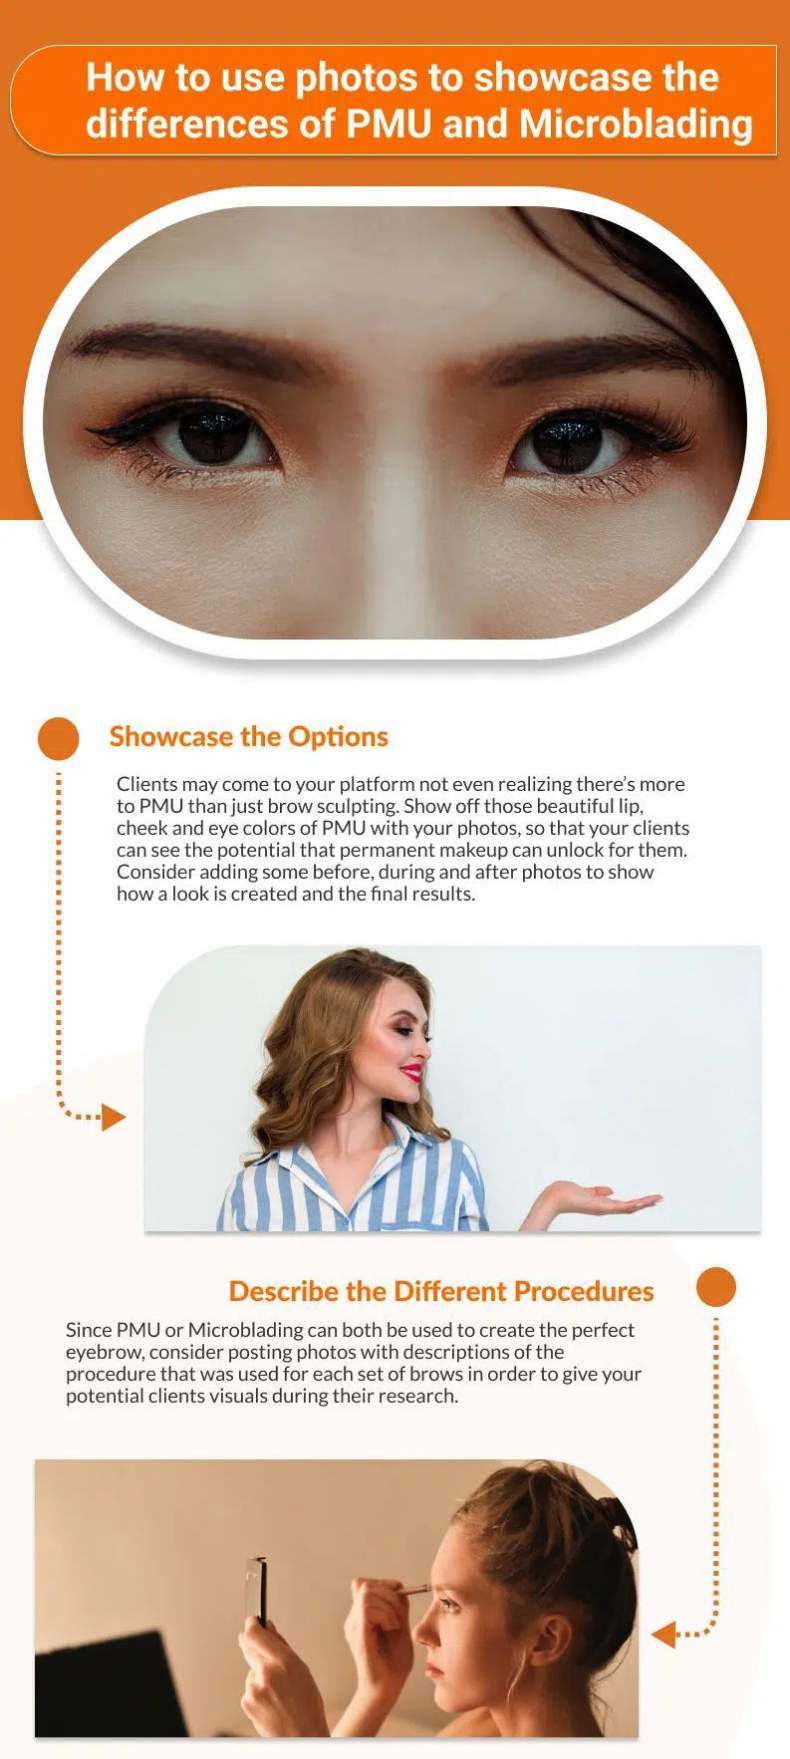 How-to-use-photos-to-showcase-the-differences-of-PMU-and-Microblading